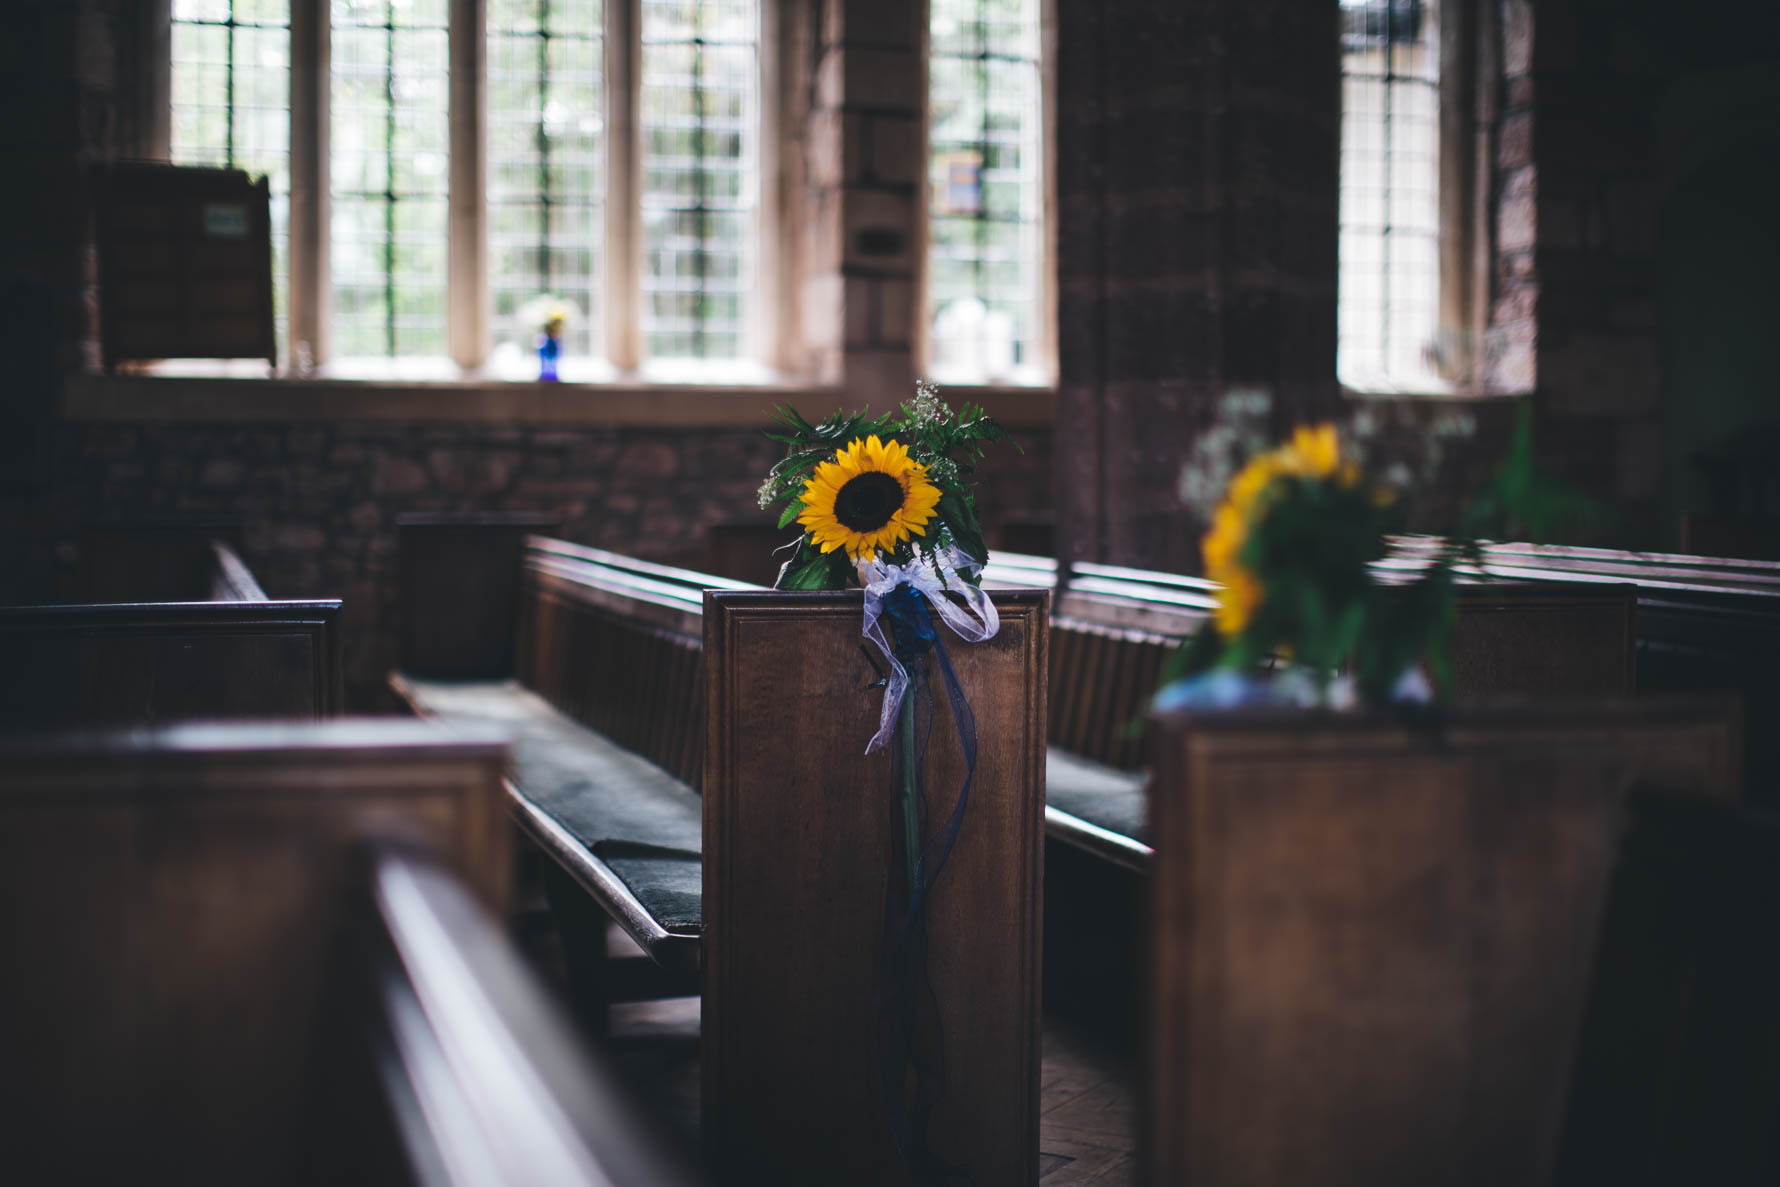 Picture of a flower arrangement with a large sunflower in the centre sat on the edge of a church pew. There are leaded glass windows in the background